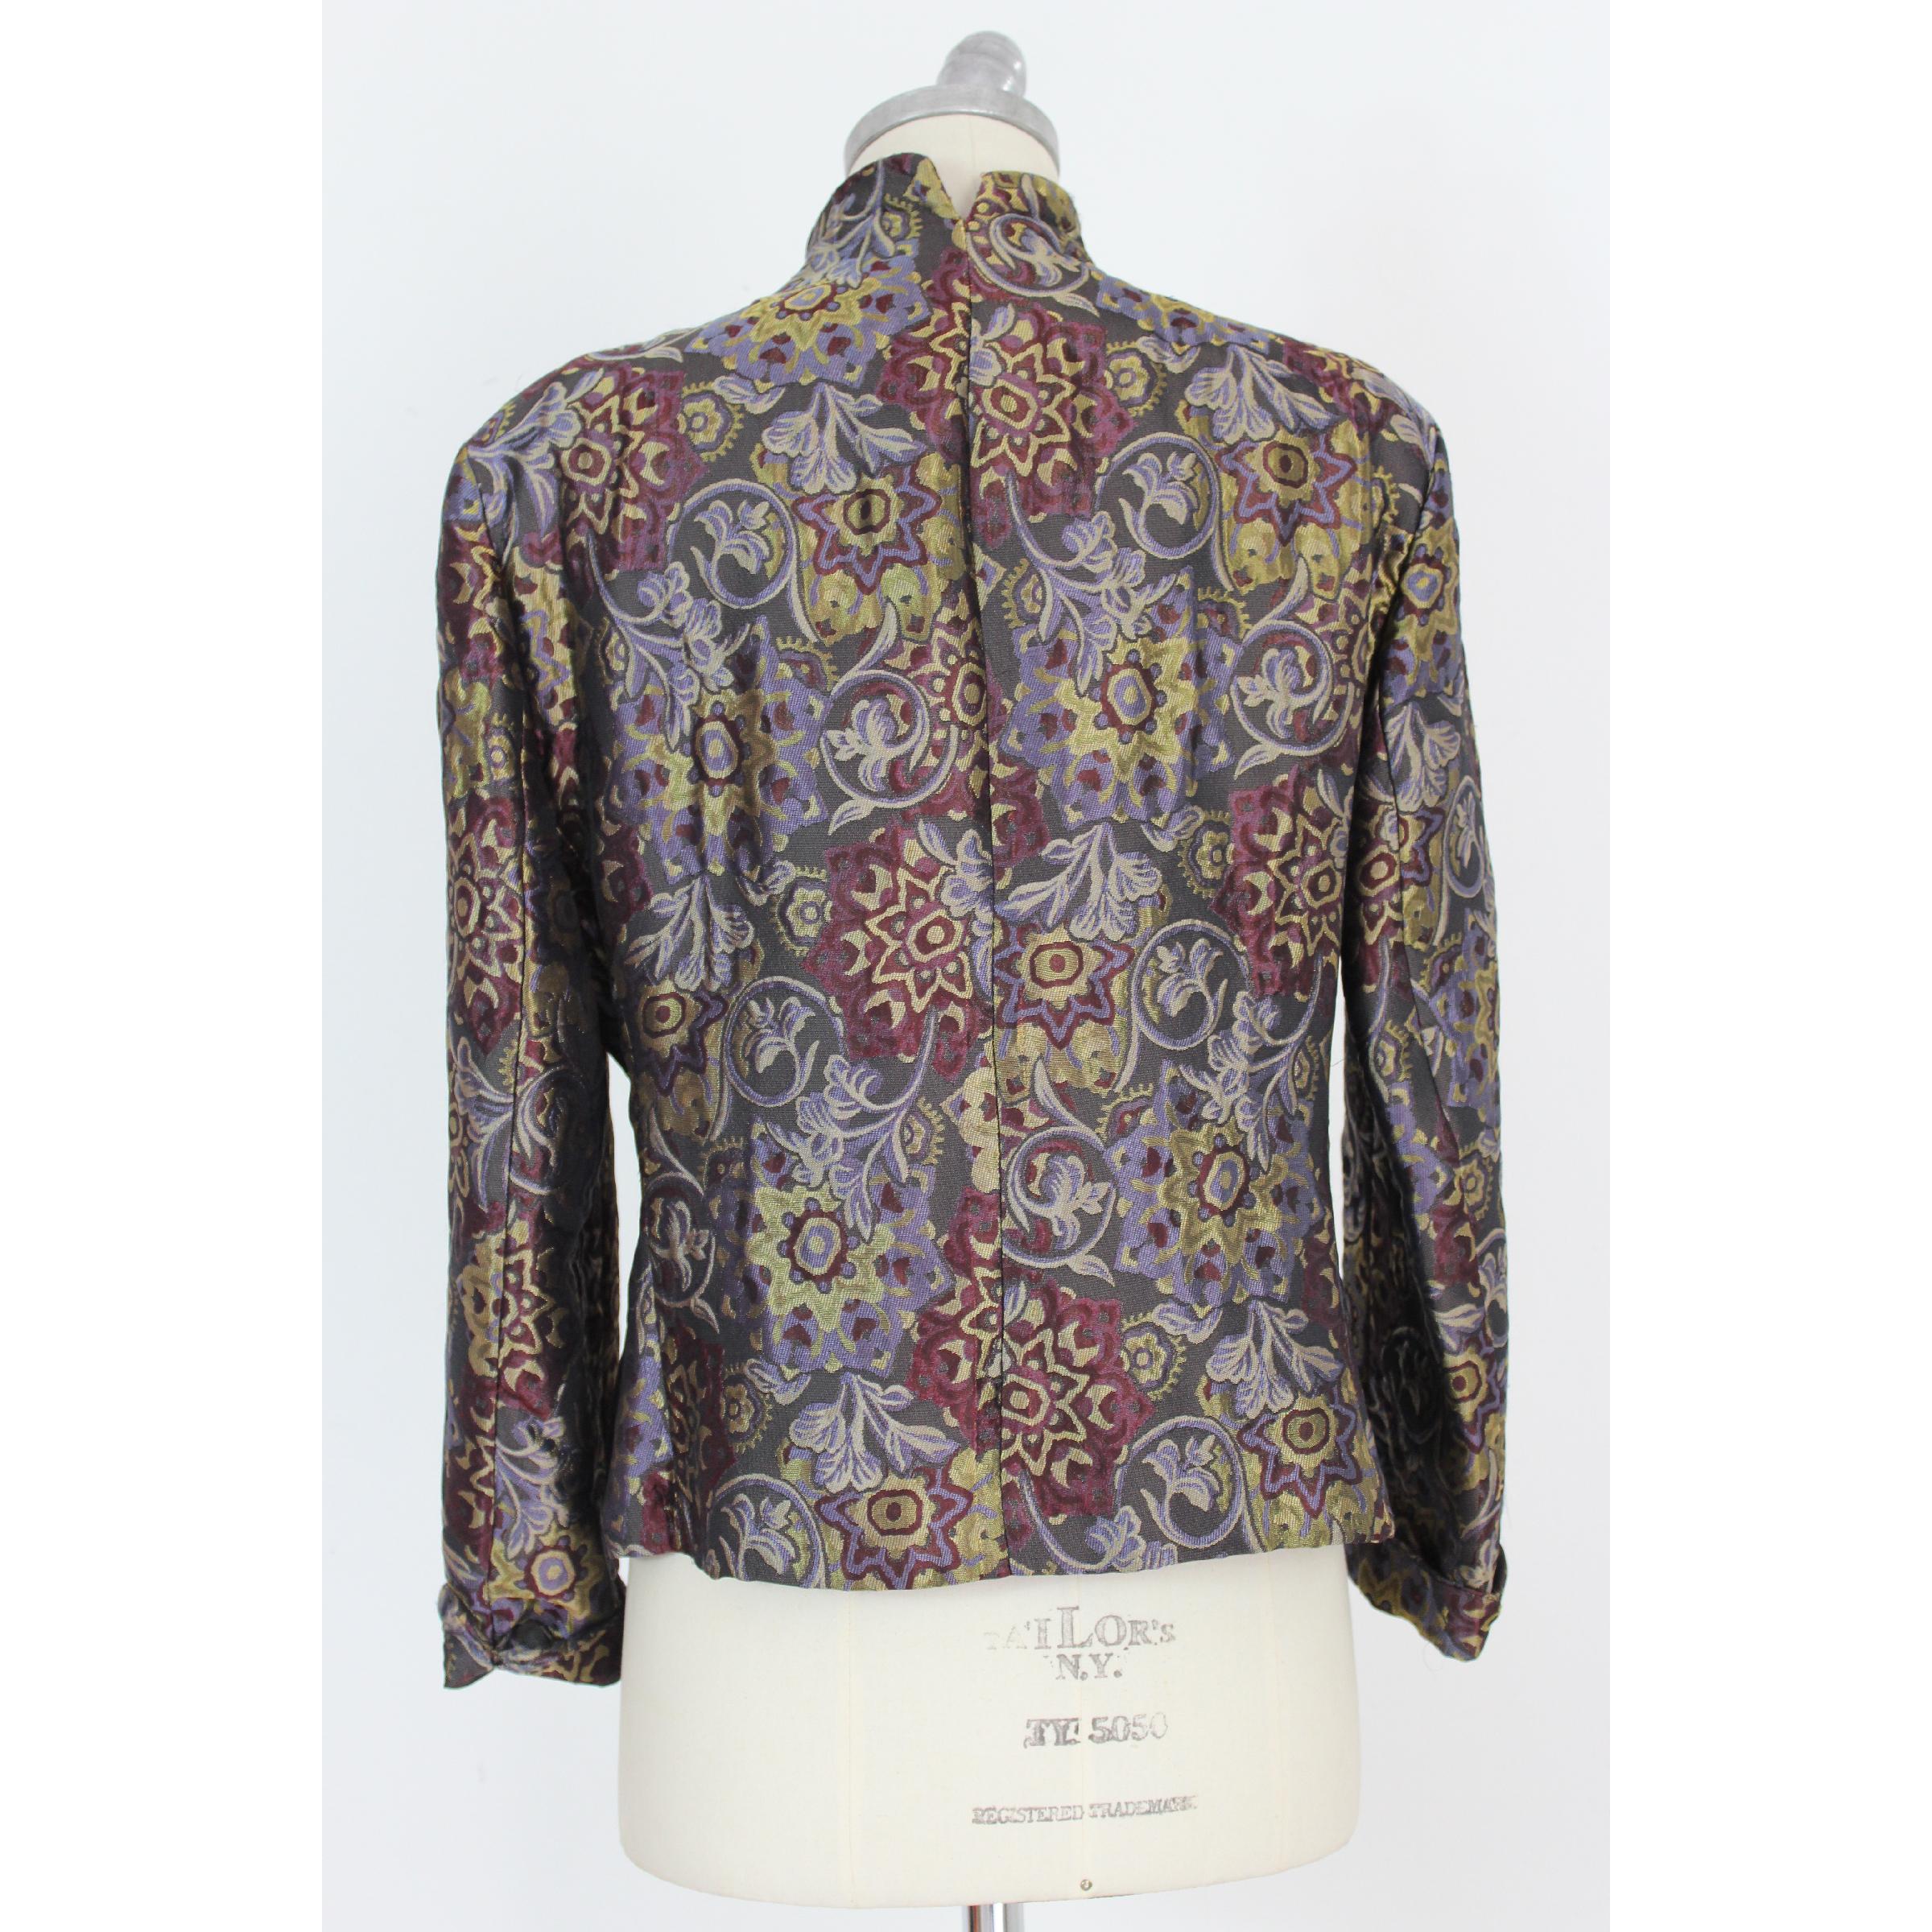 Mani 80s vintage women's jacket, Armani line. Damask jacket with multicolored floral designs, 53% acetate, 29% wool 18% silk. High-necked Korean model, fitted. Inside the spare button. Made in Italy. Excellent vintage condition.

Size: 44 It 10 Us